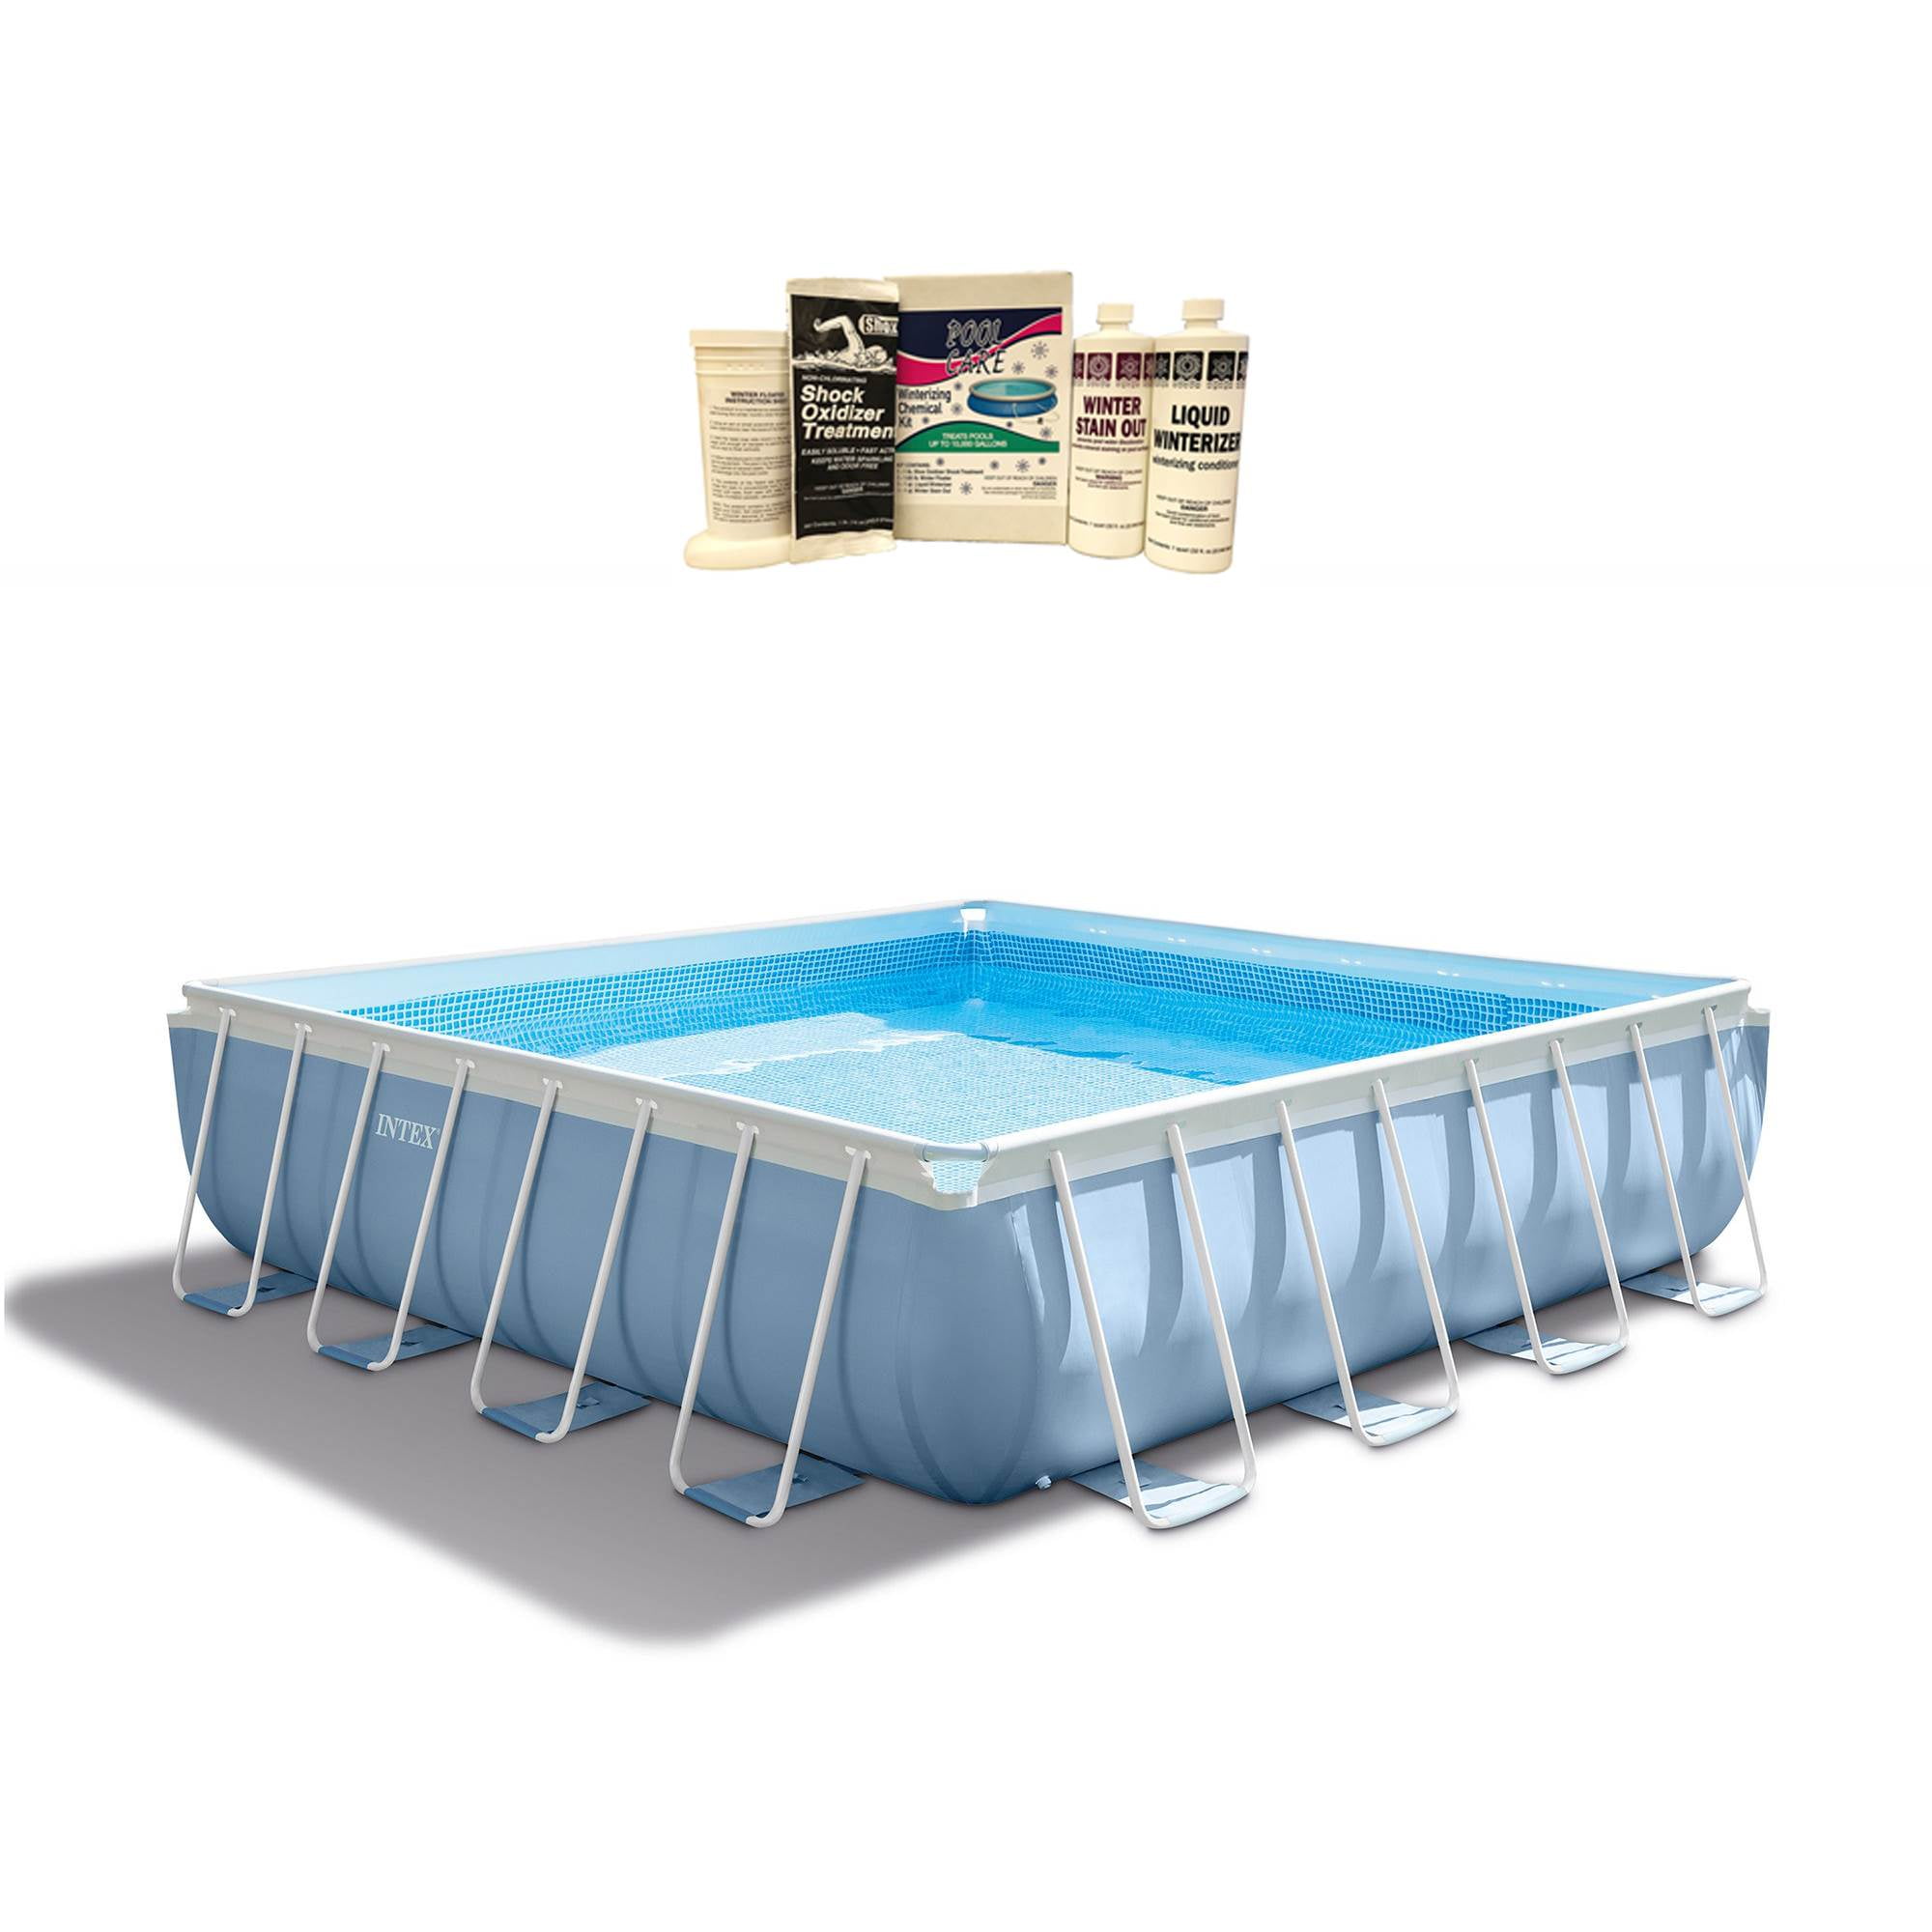 Unique How To Close An Above Ground Swimming Pool For Winter for Living room